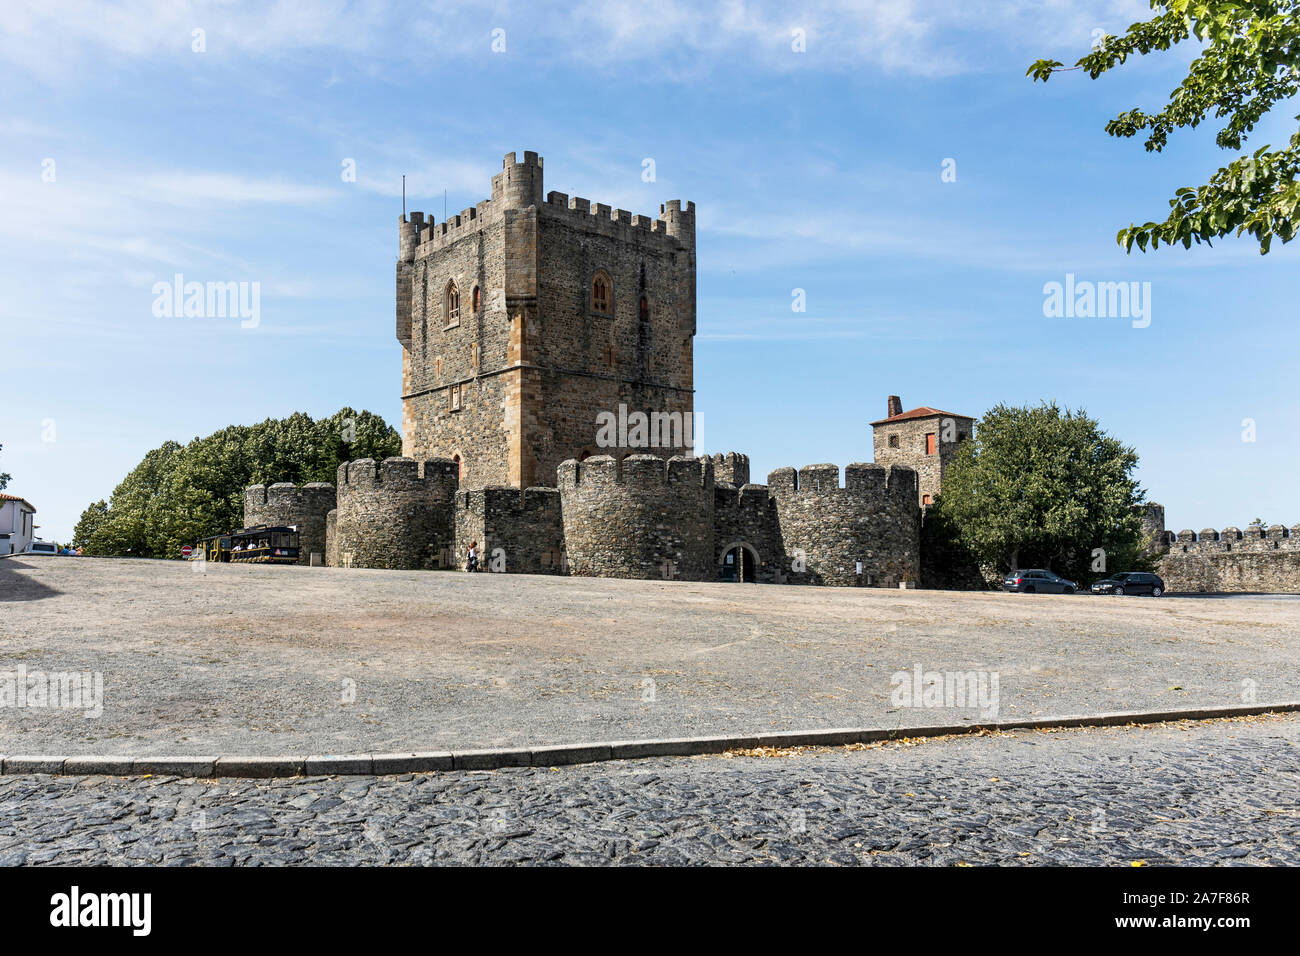 The original medieval castle built on the highest point Stock Photo